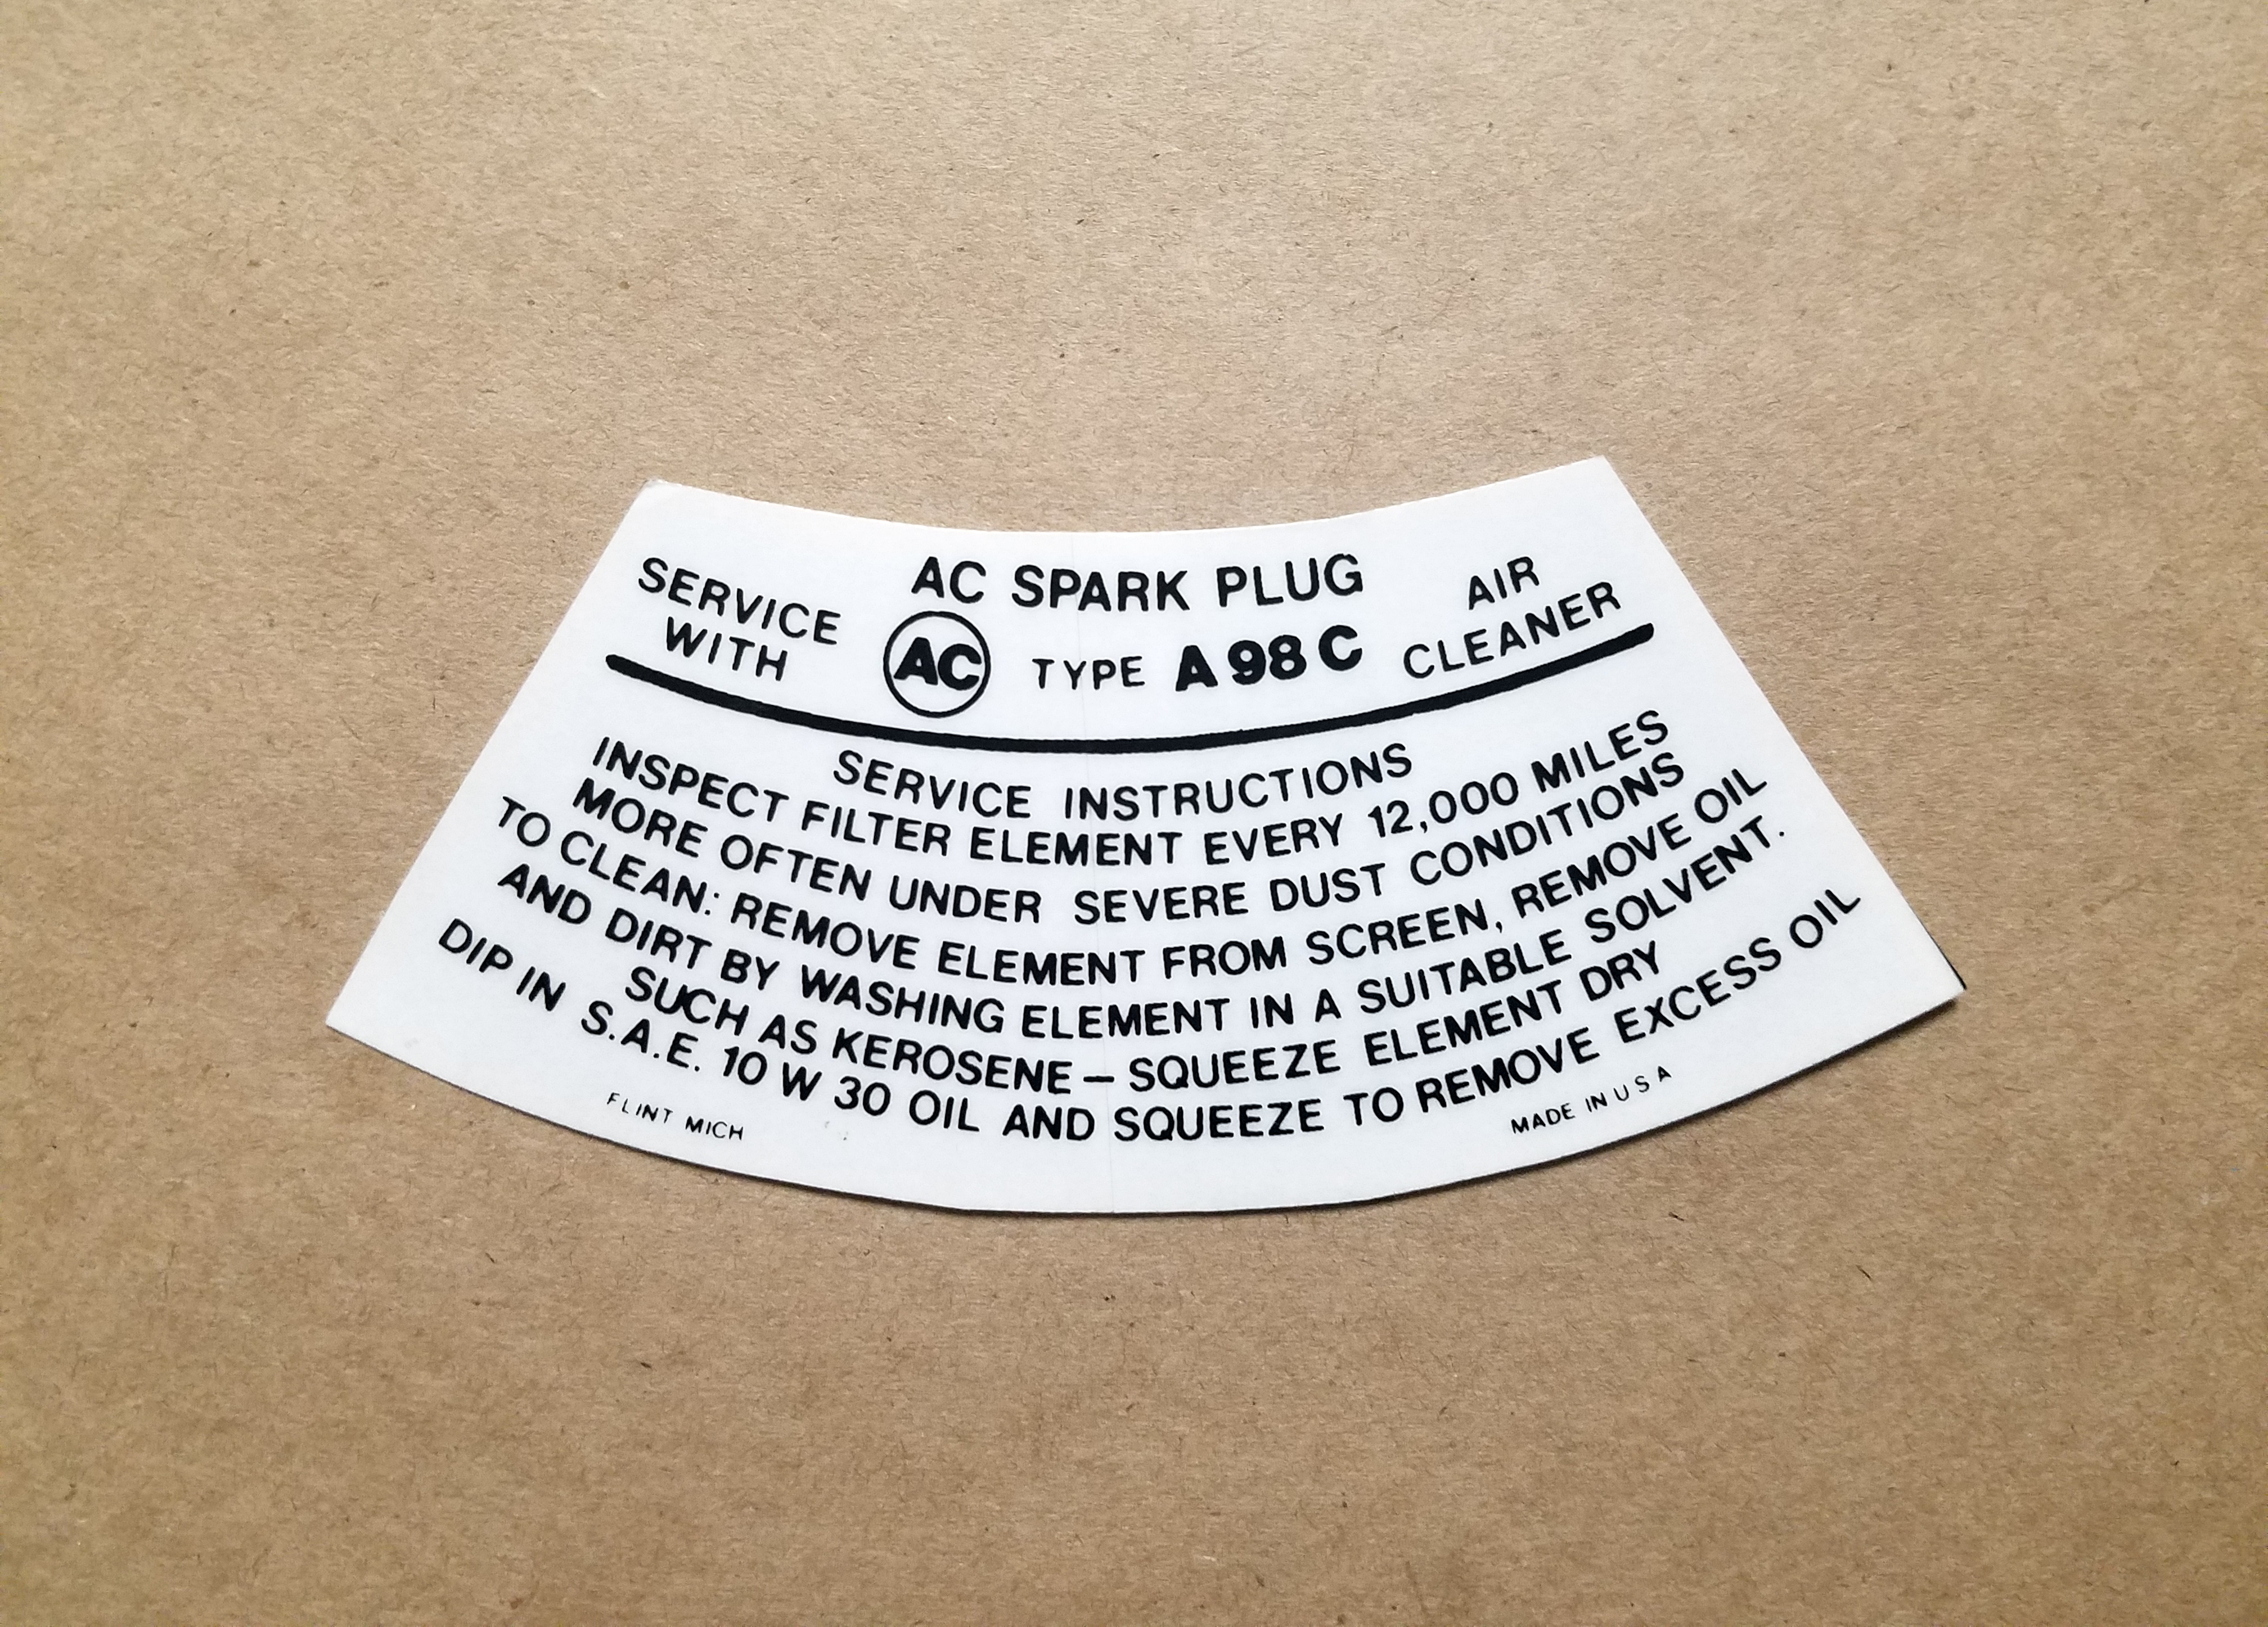 1965-70 Air Cleaner Service Instruction Decal, Black (On Decal: A98C), P8 & GP